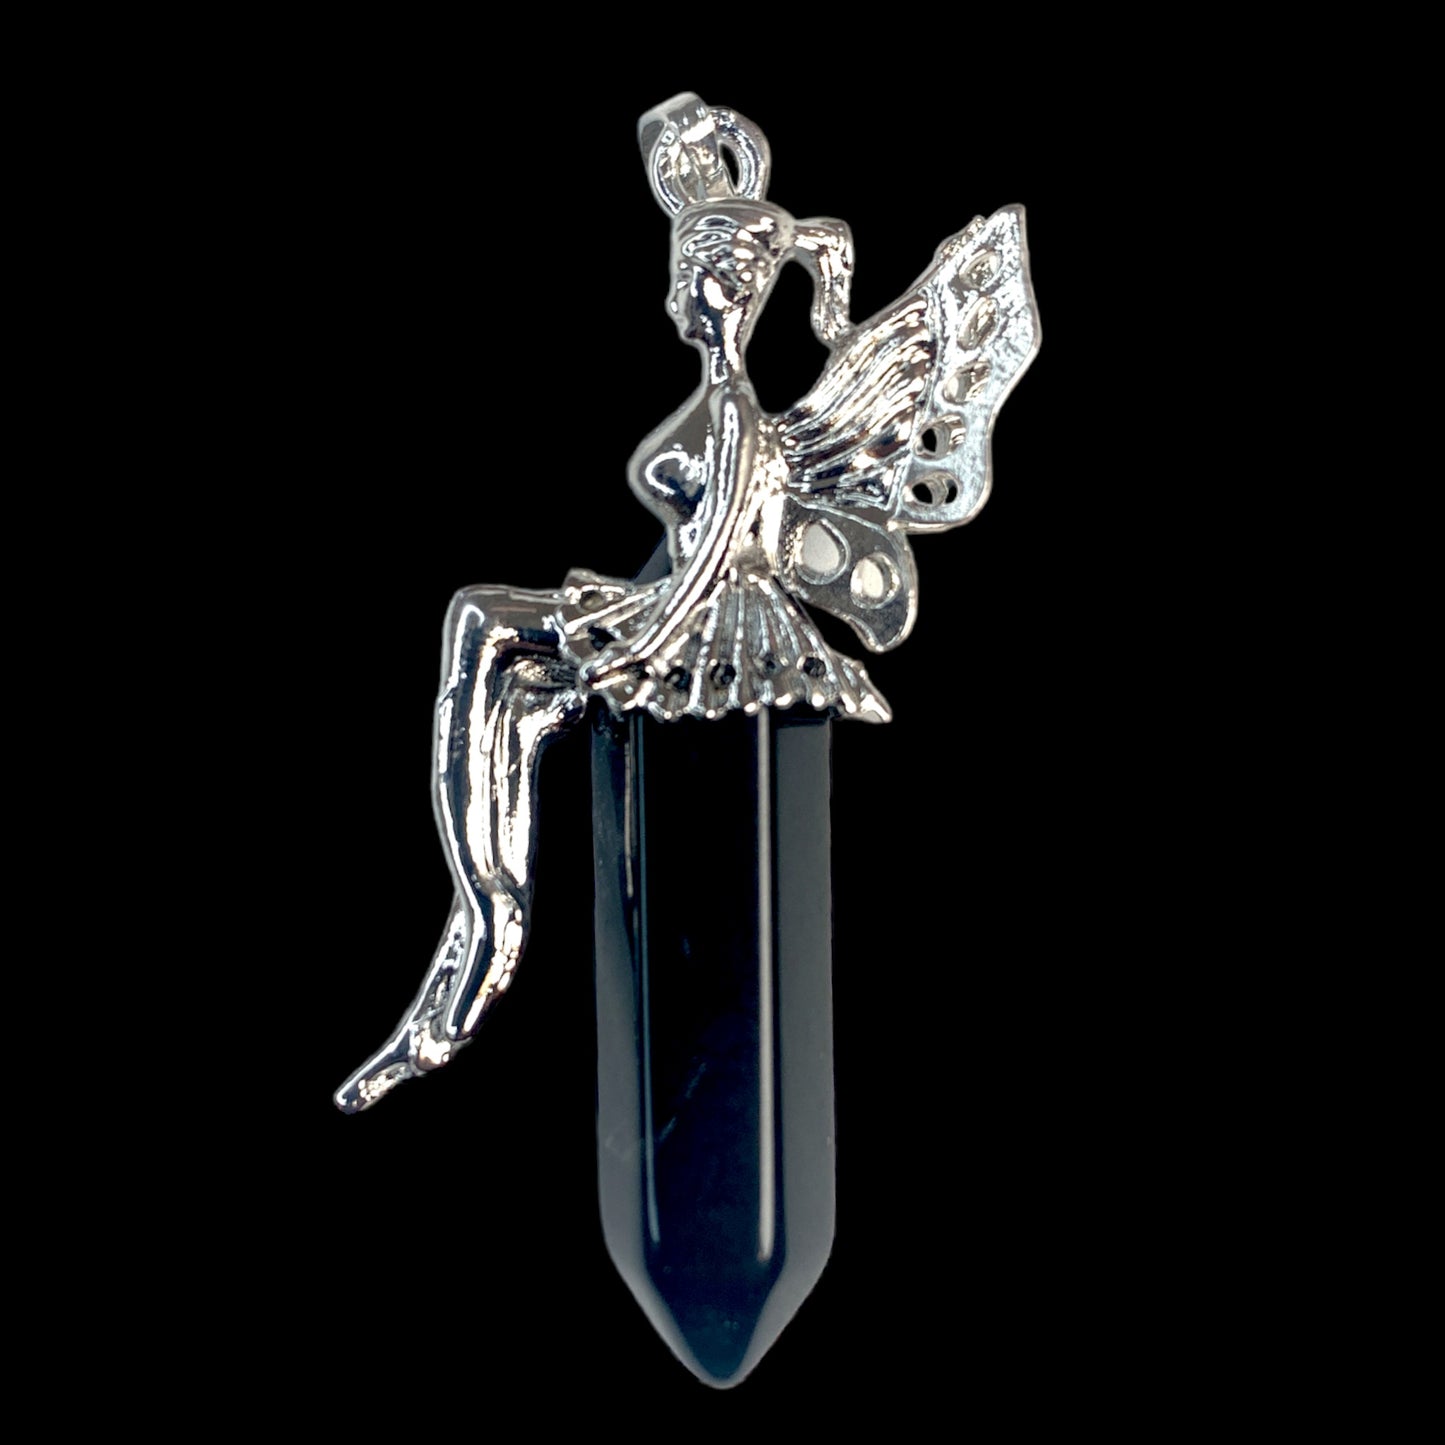 Fairy Design Terminated Pendant - Black Obsidian - Silver Color Plated Metal - 50mm - China - NEW1022